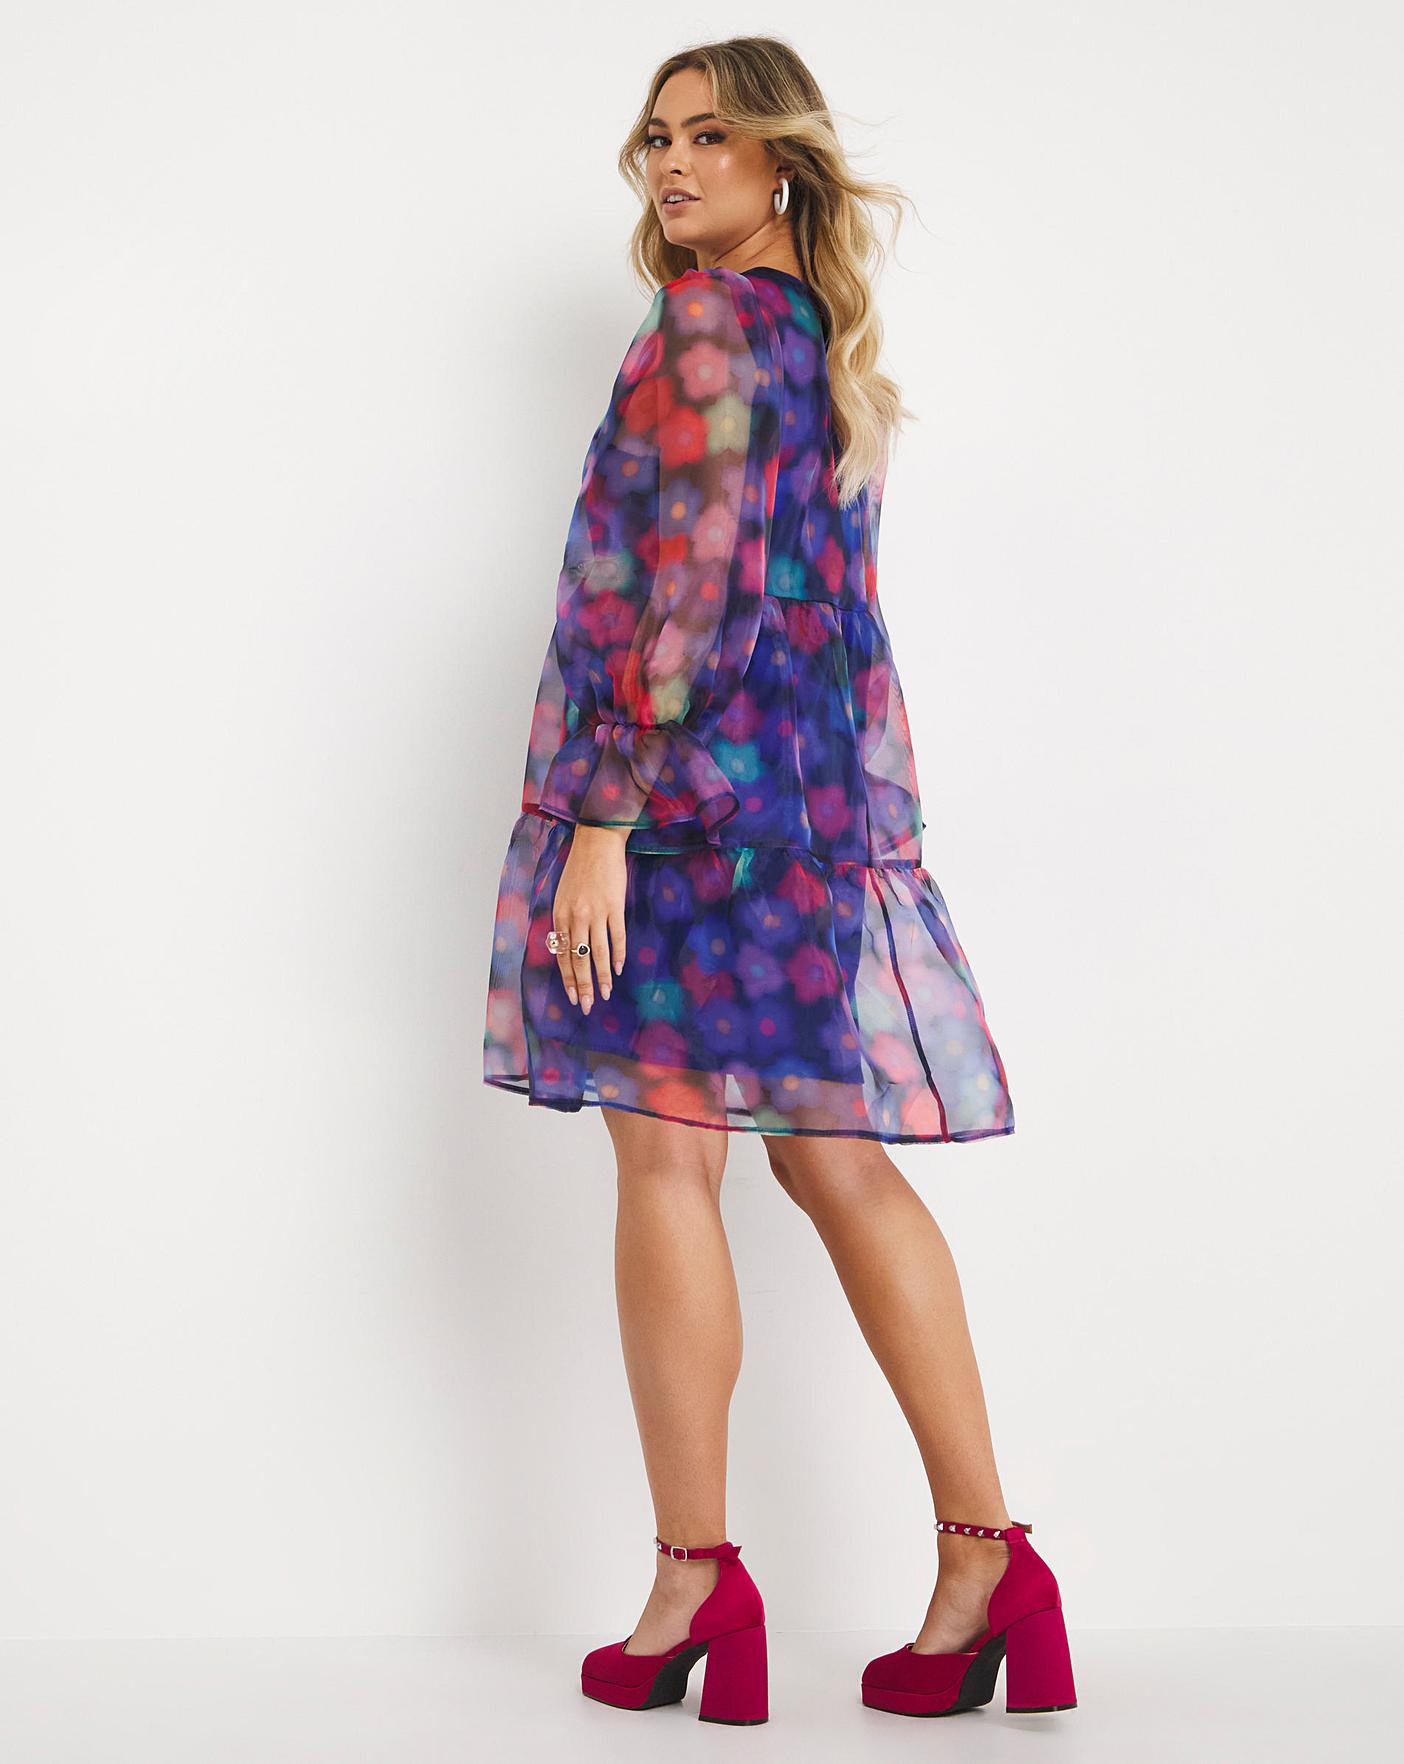 Twisted Wunder short sleeve mini dress in happy floral print